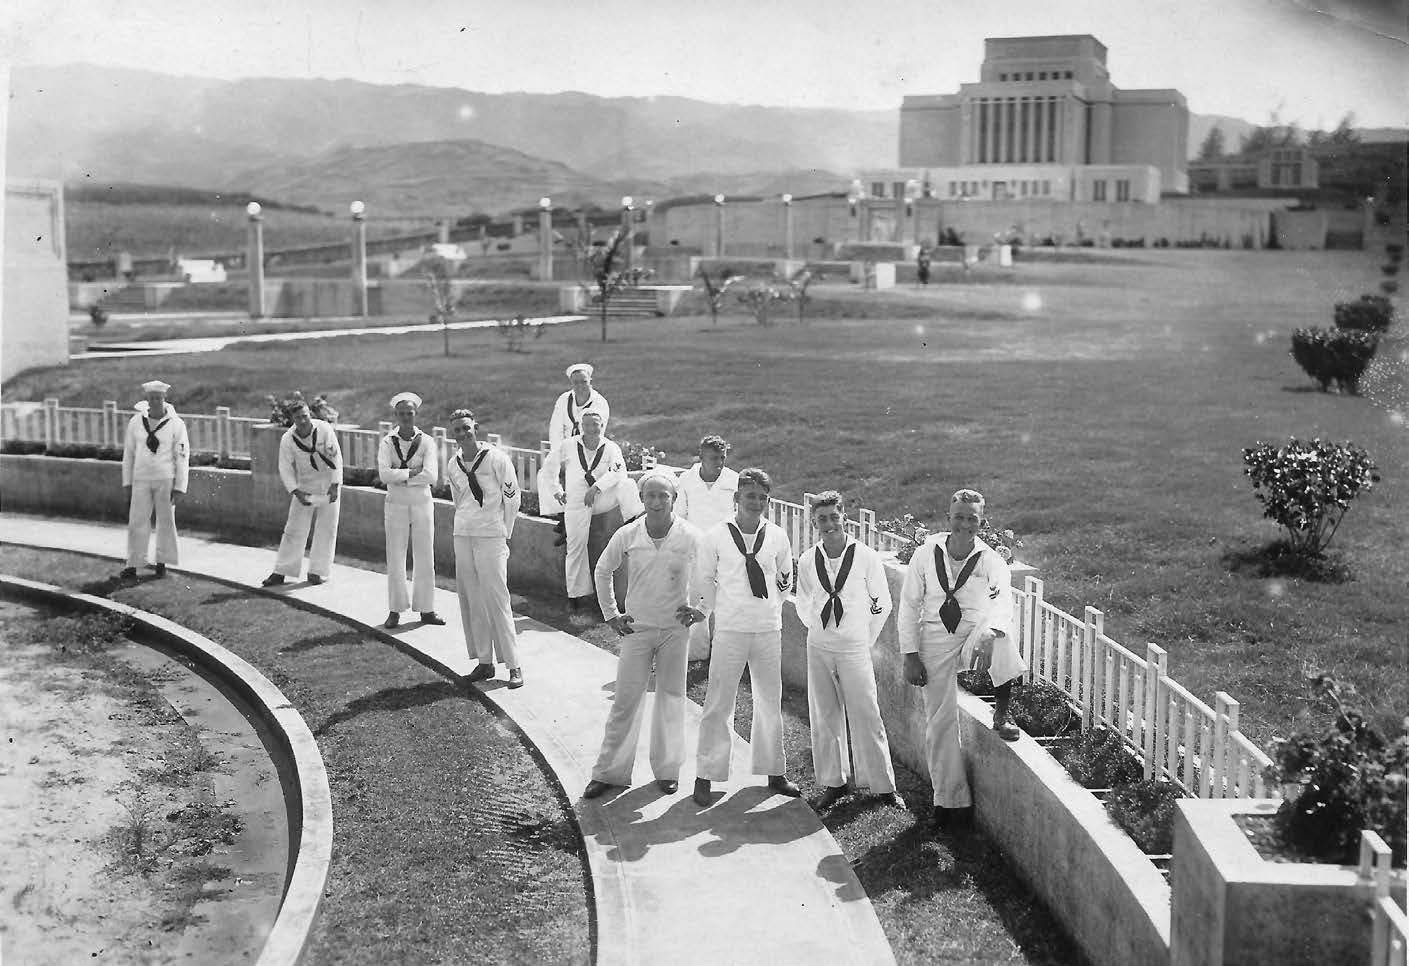 Many visitors found their way to the temple grounds, where missionaries conducted tours, answered questions, explained the gospel, and dispensed literature. Photo of sailors courtesy of Mark James. Photo of visitors courtesy of Church History Library.